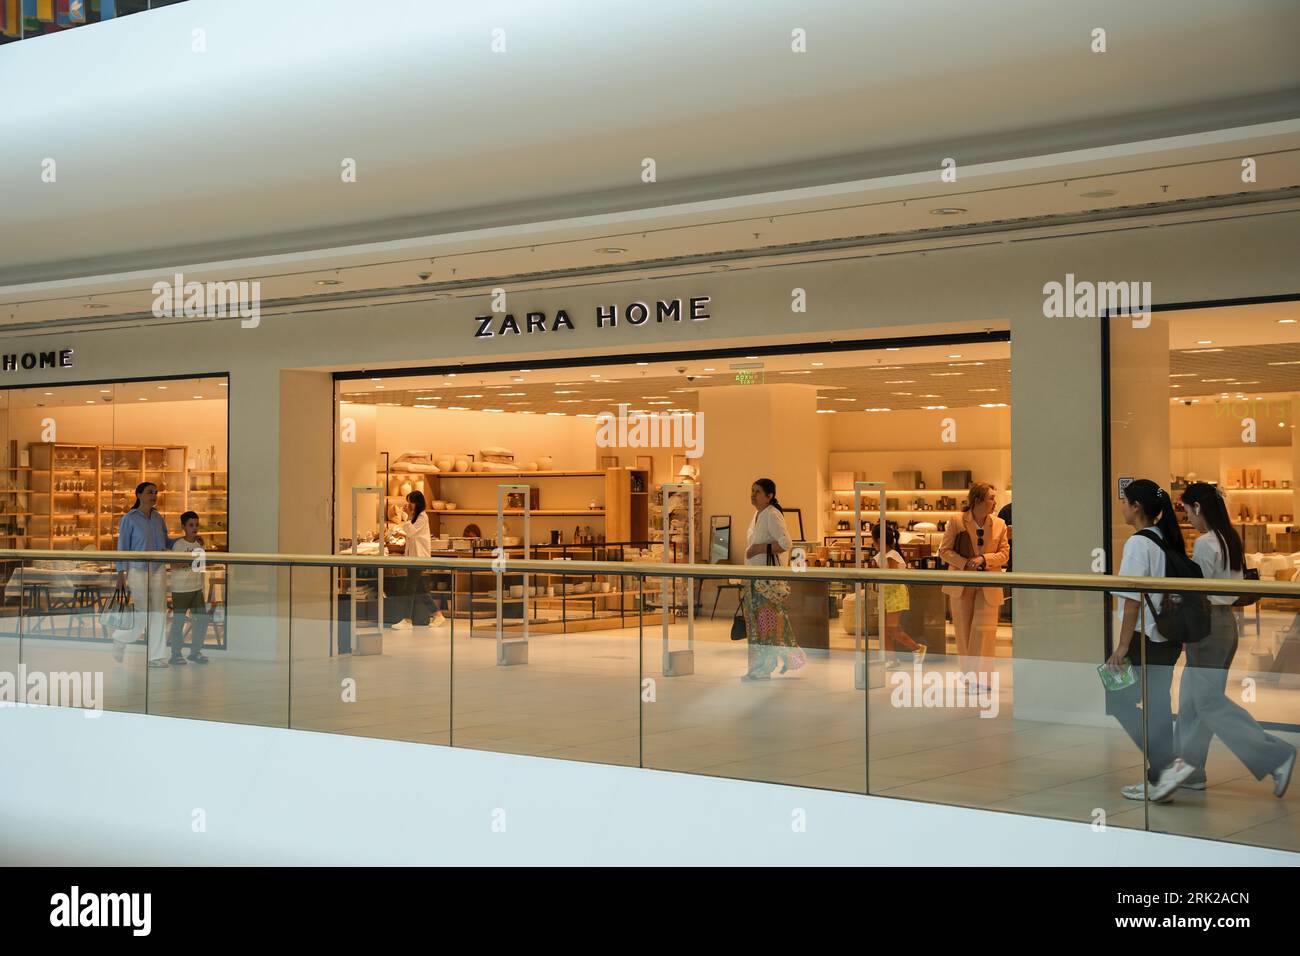 Almaty, Kazakhstan - August 17, 2023: Zara Home retail store in a shopping center. Houzefold brand products Stock Photo